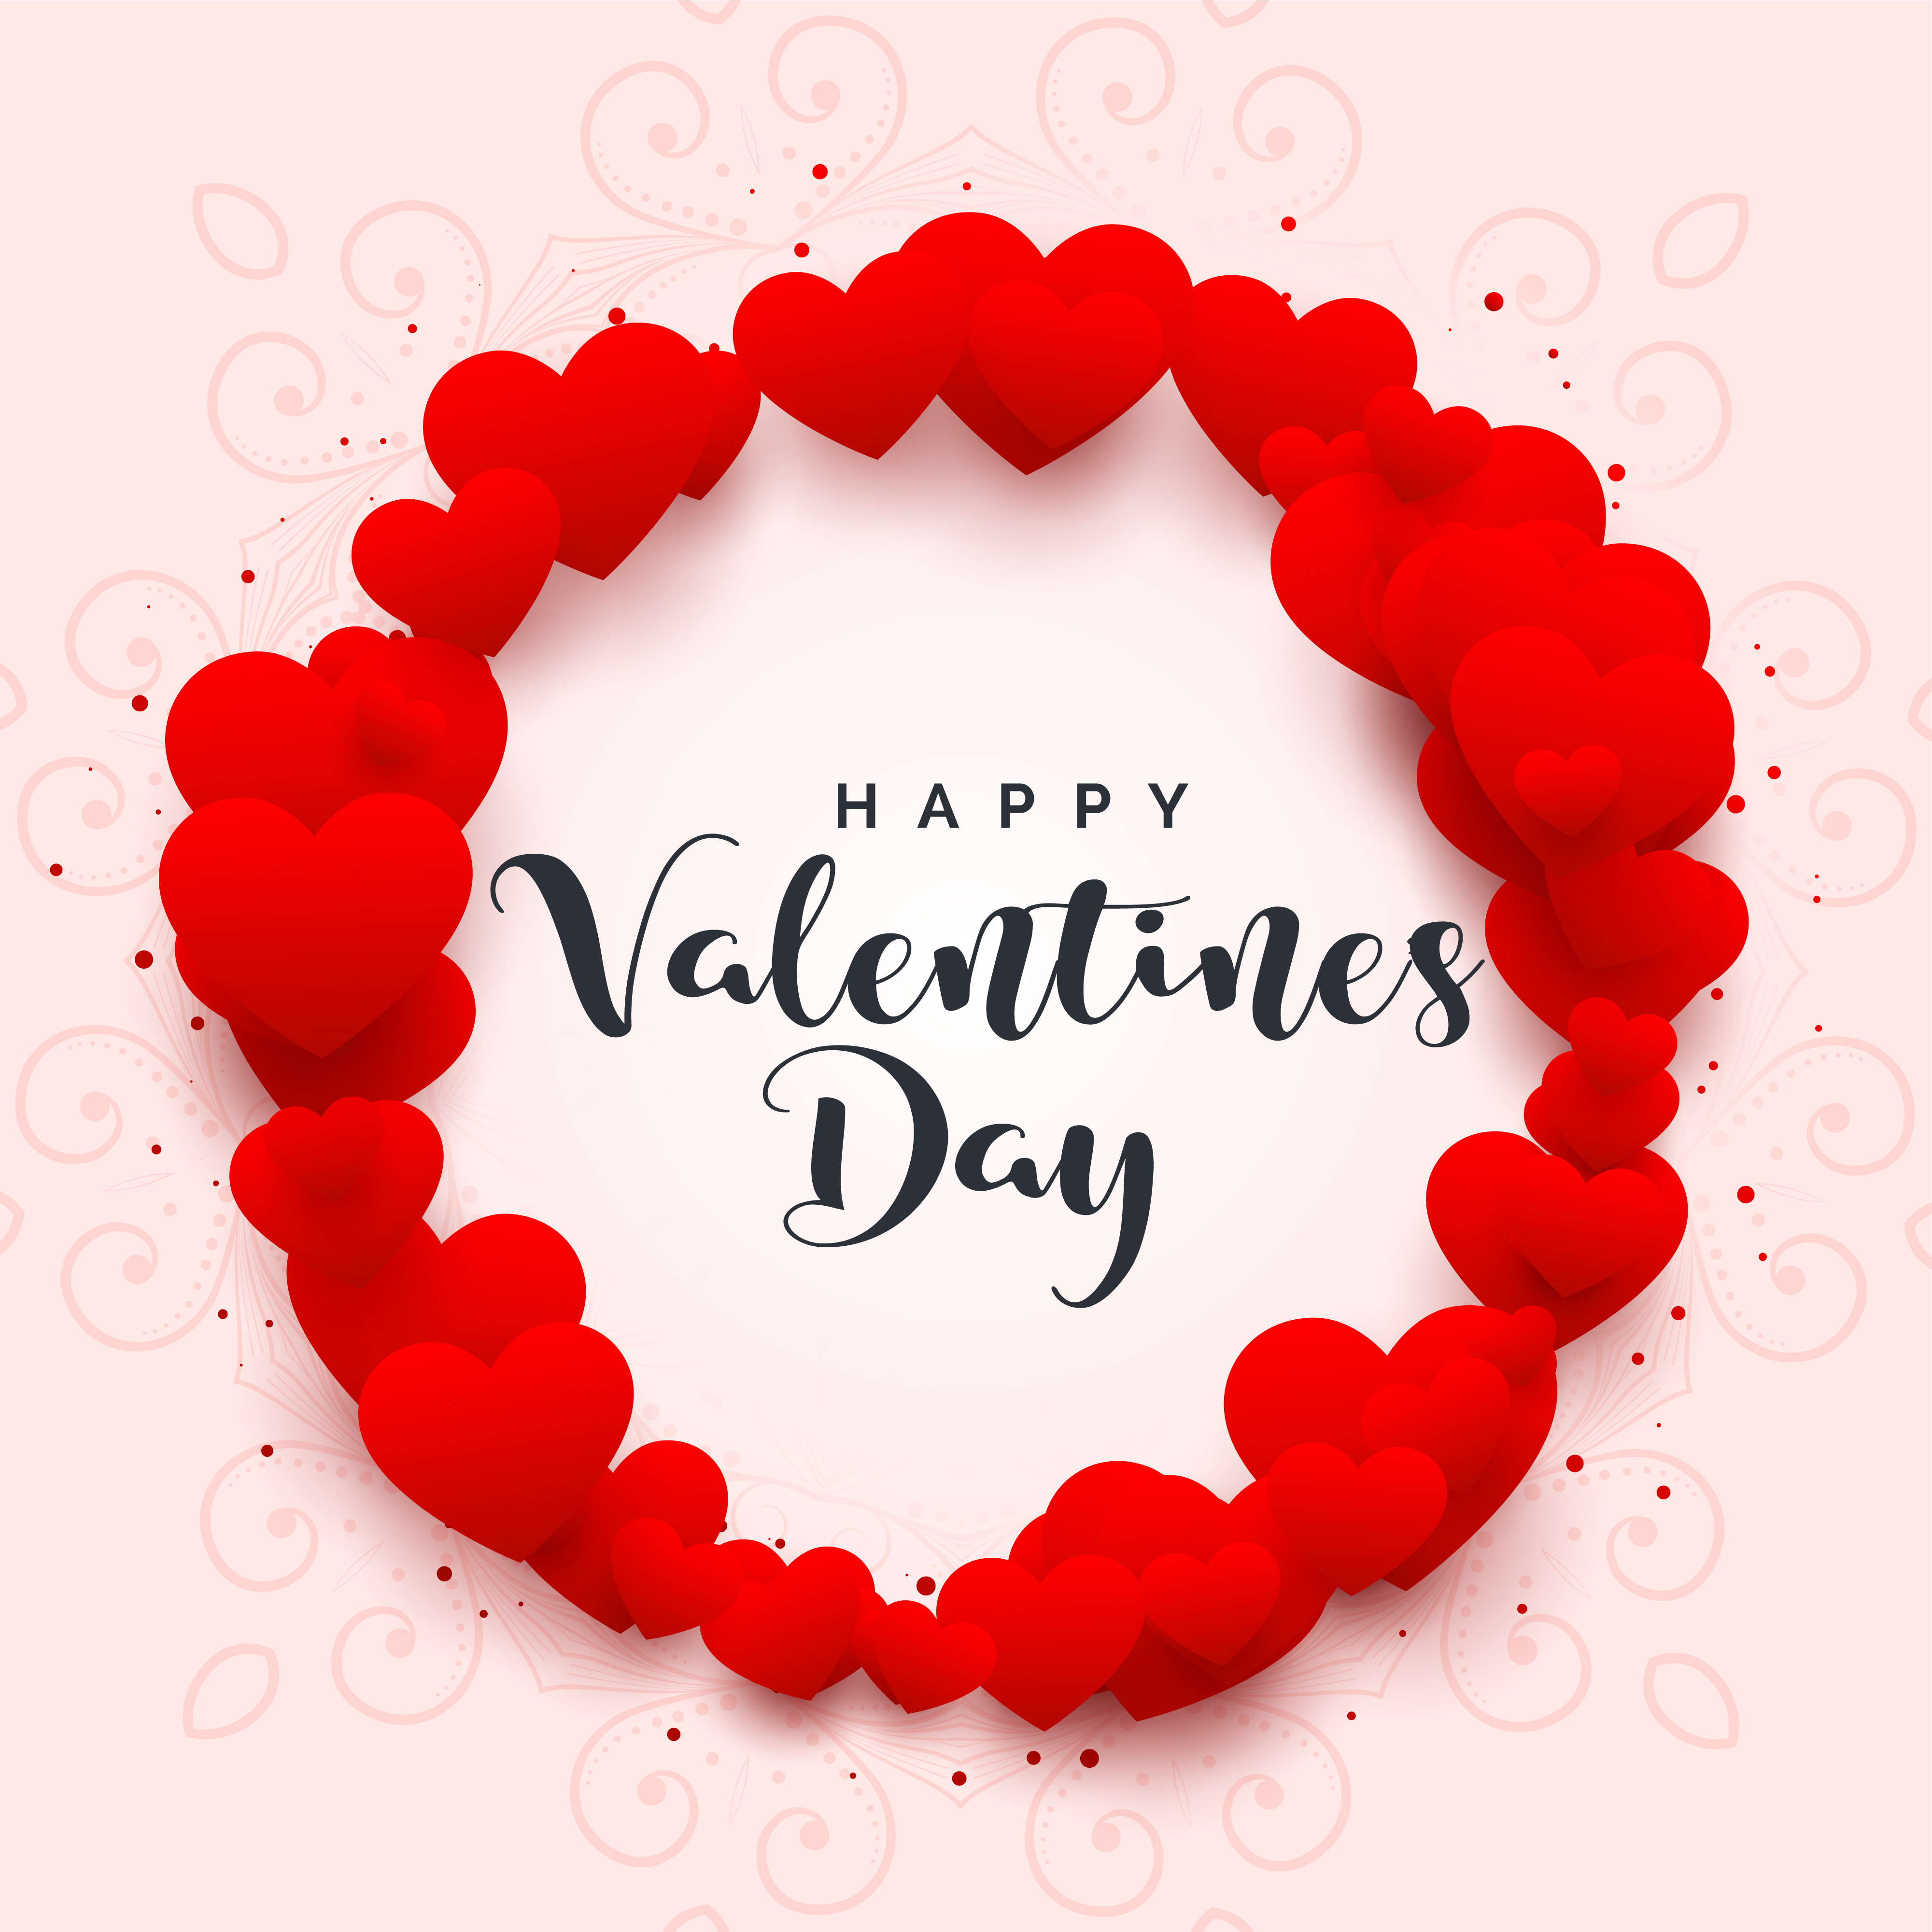 hearts frame for happy valentines day - Download Free Vector Art, Stock Graphics & Images4001 x 4001